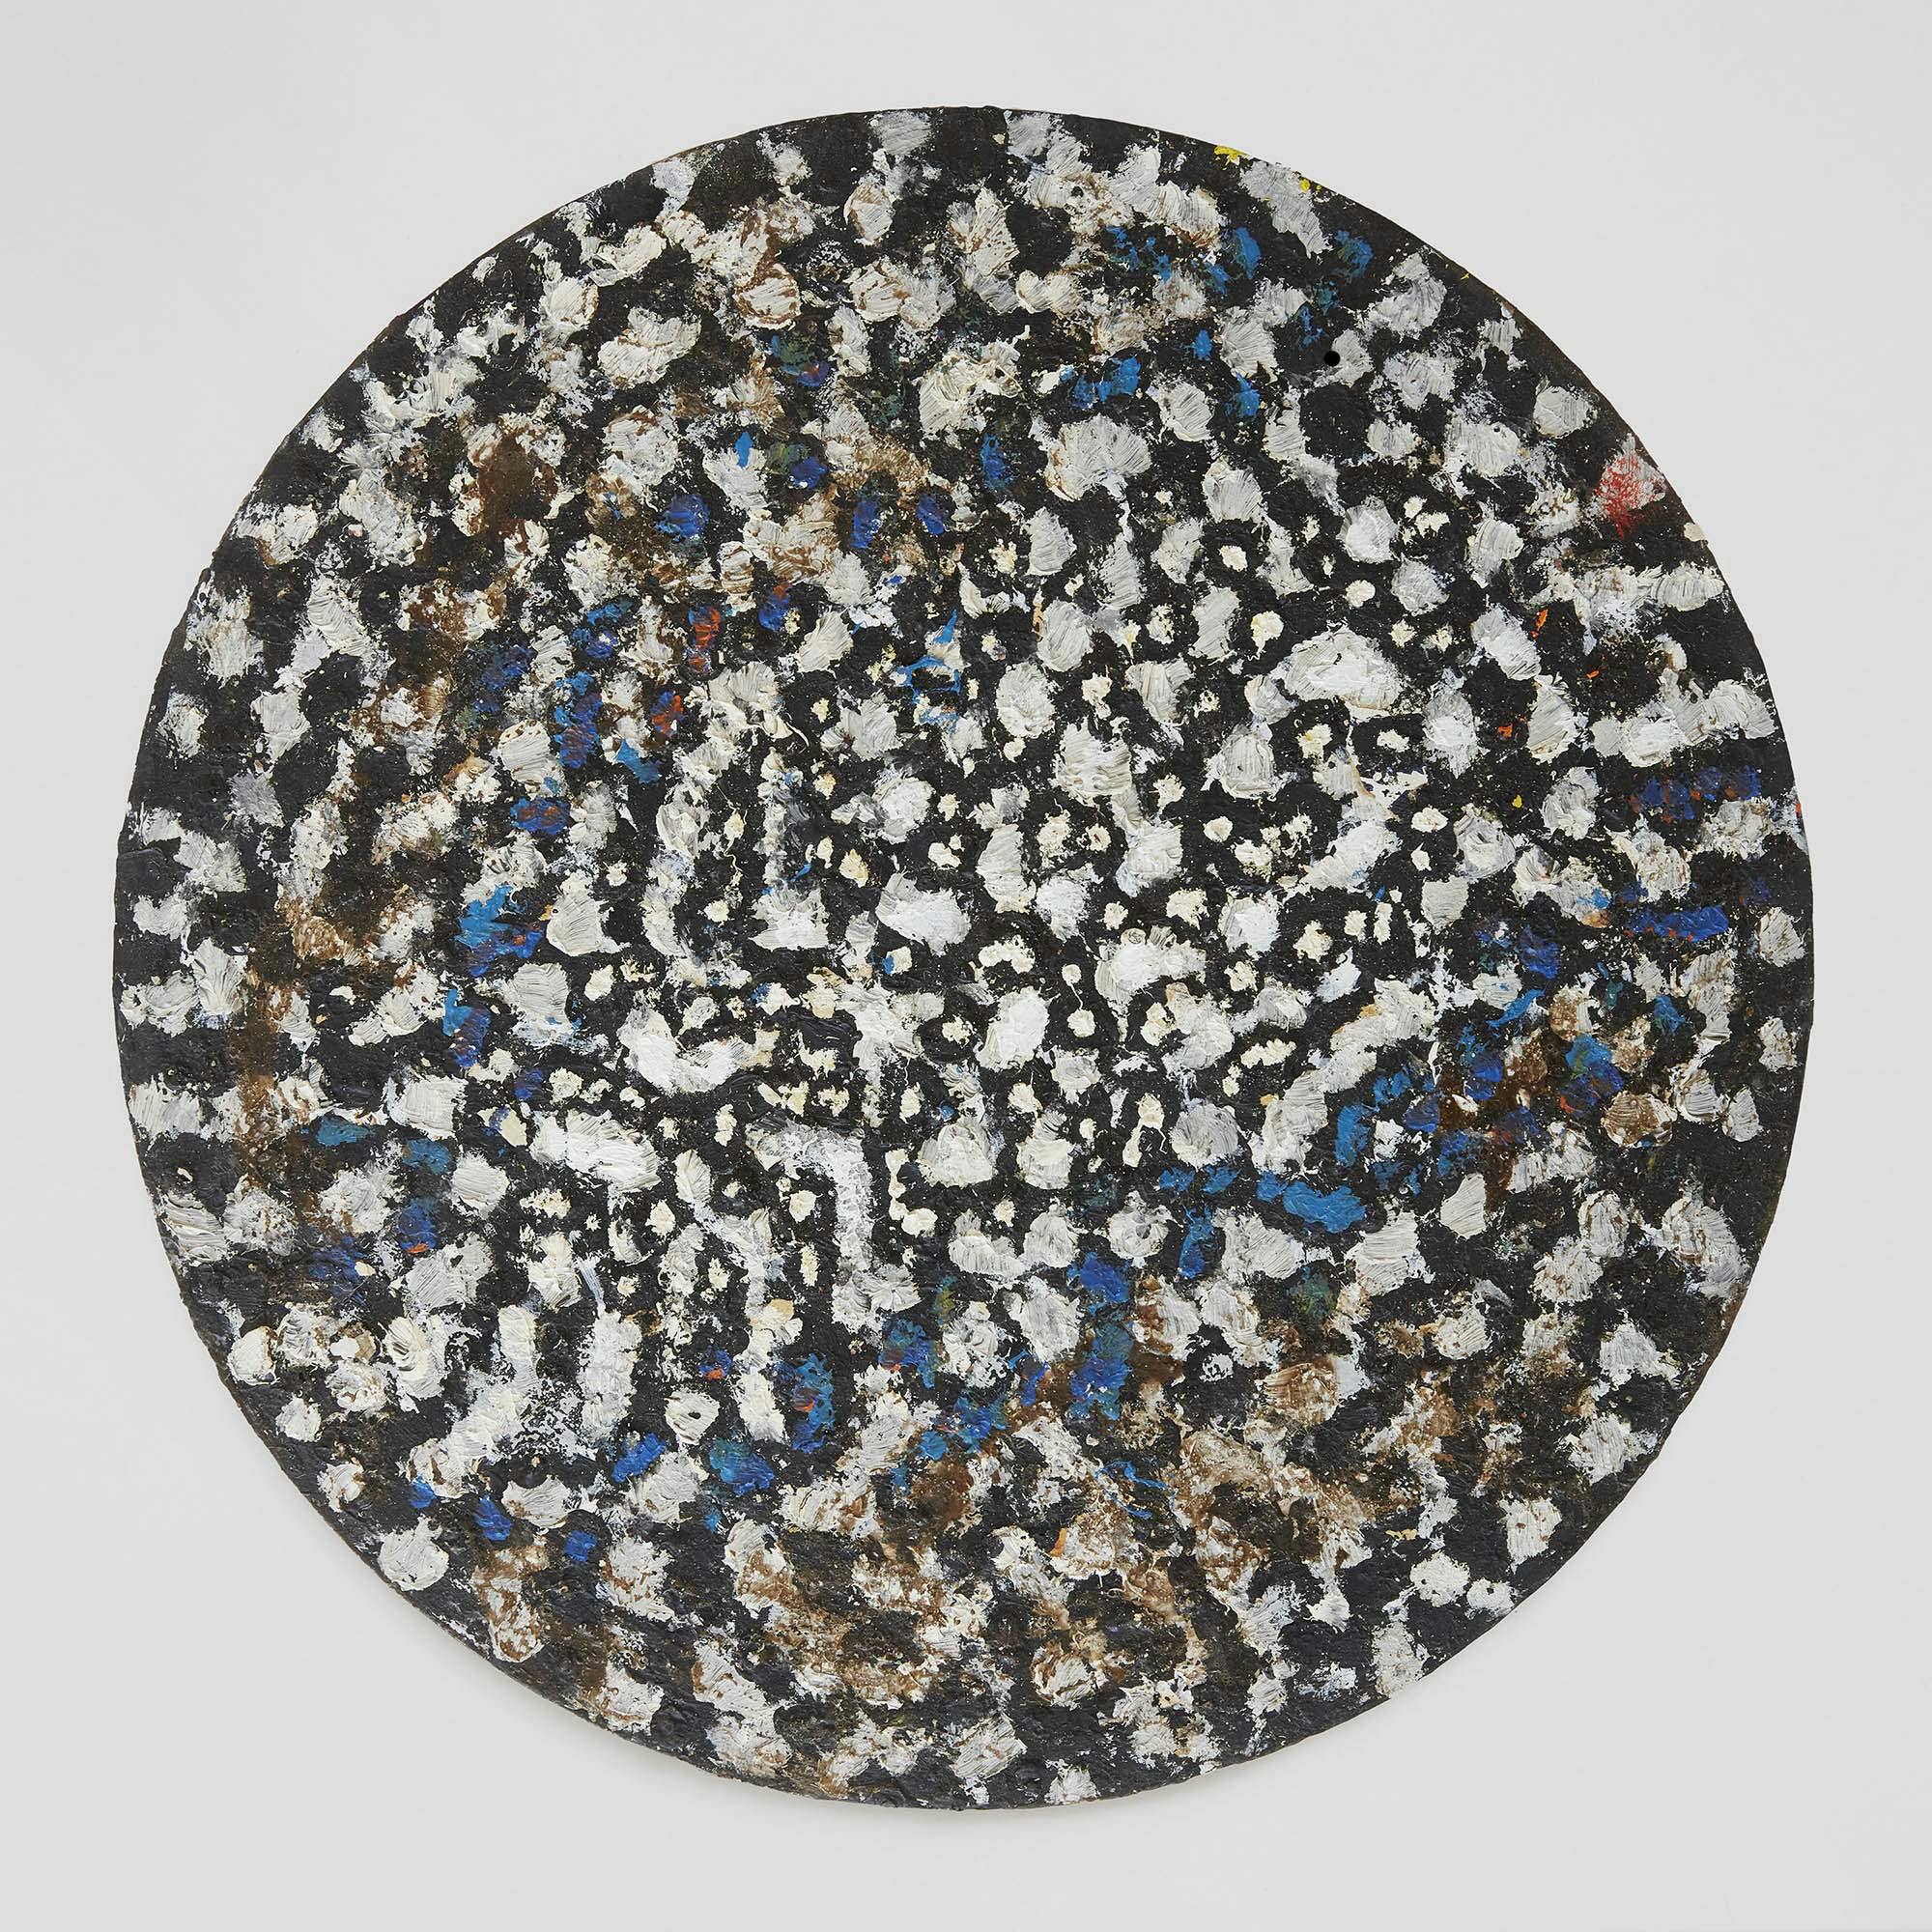 Cosmos XLVII
1978
Acrylic on board
14 x 14 in. (35.6 x 35.6 cm)
 – The Richard Pousette-Dart Foundation